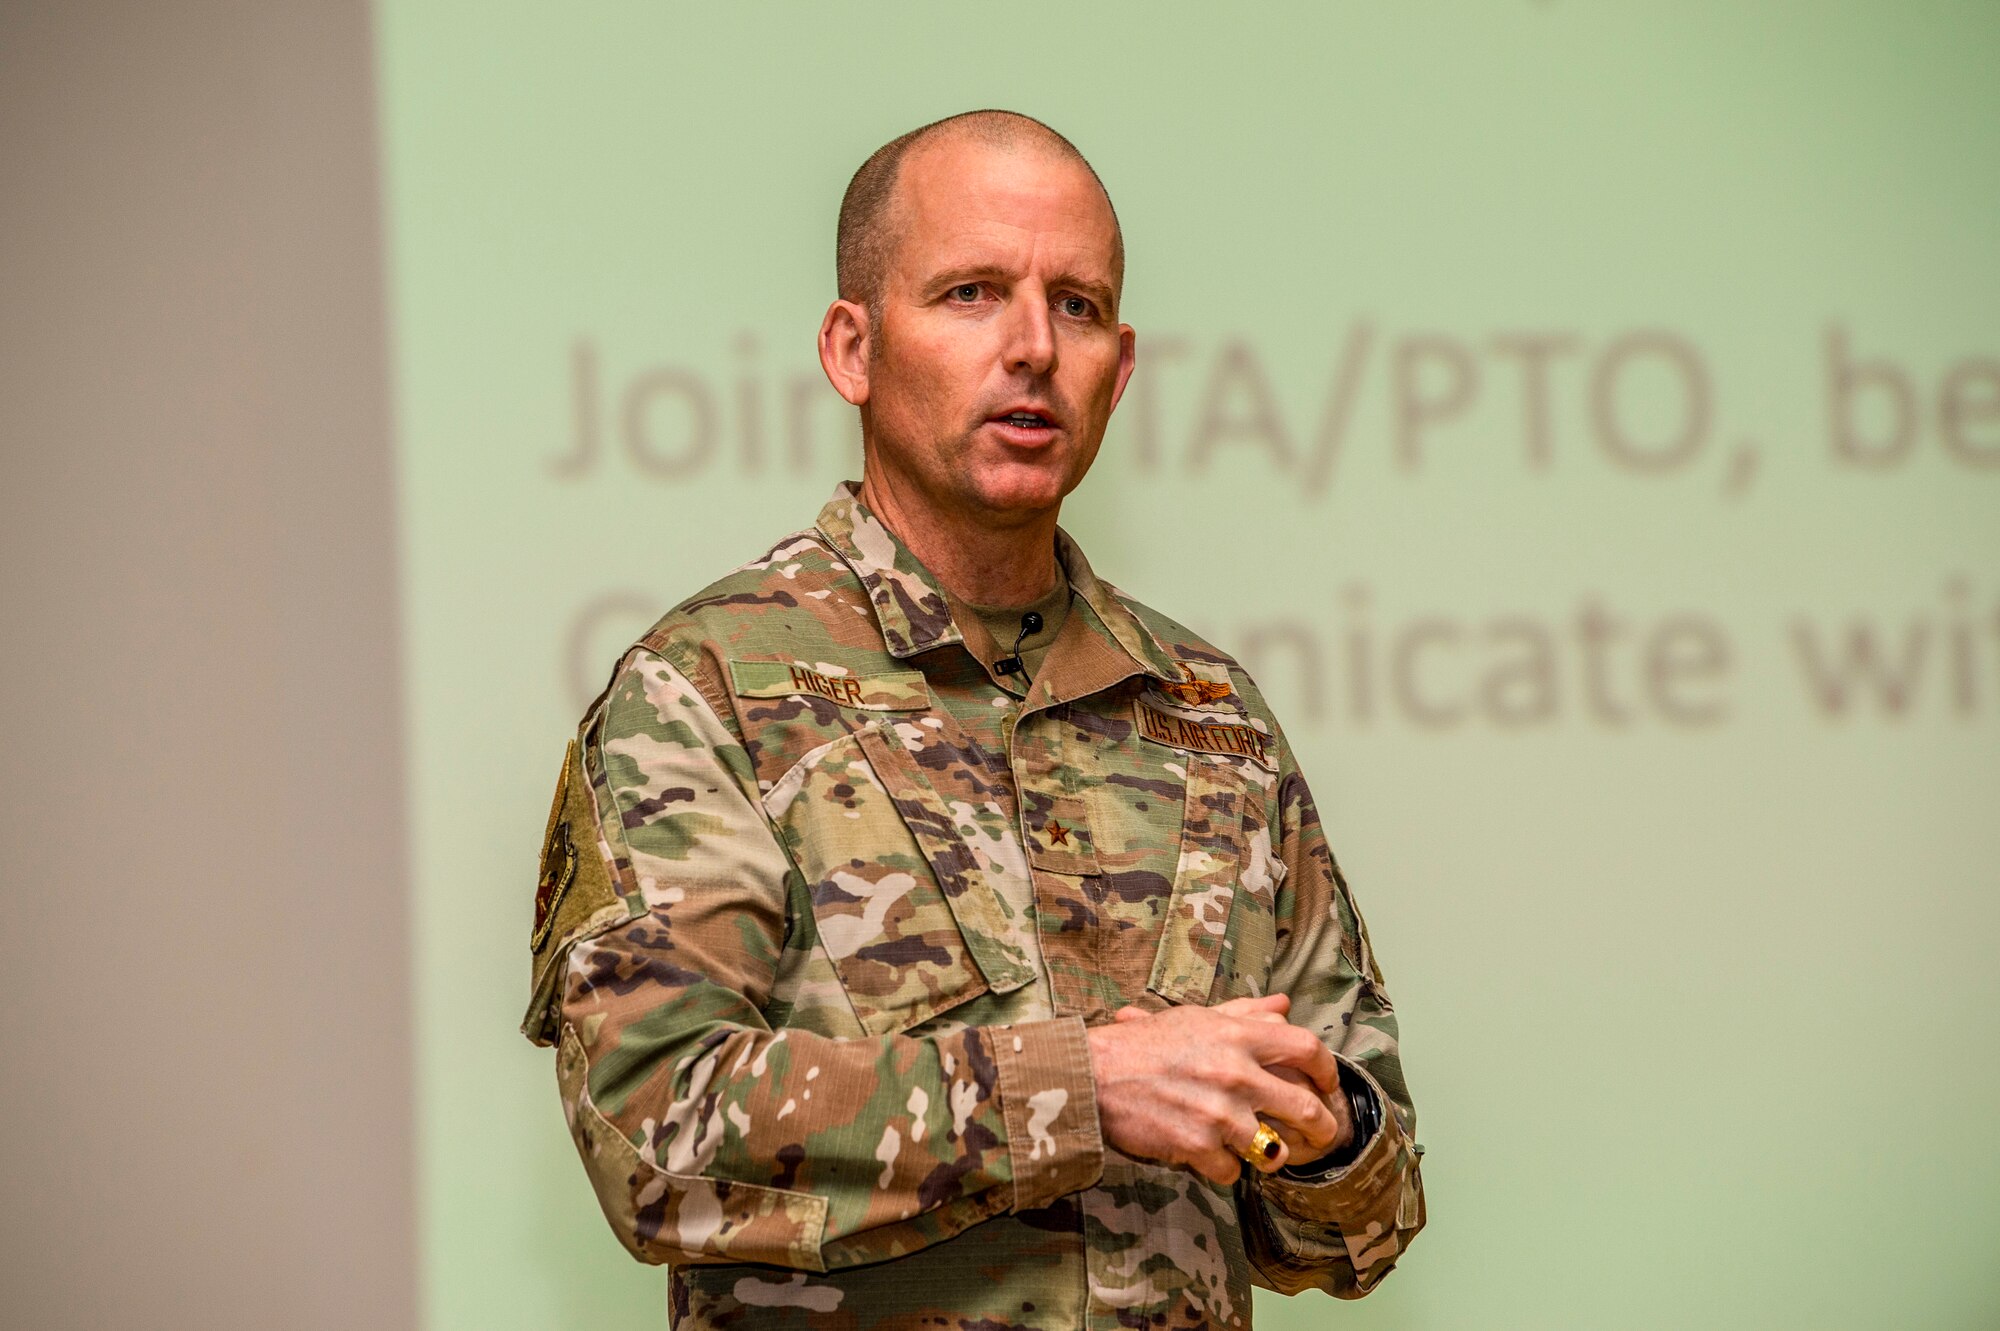 Brig. Gen. Matthew Higer, Commander, 412th Test Wing delivers remarks during the 412th Test Wing Townhall and All Call at Edwards Air Force Base, California, Jan. 20.